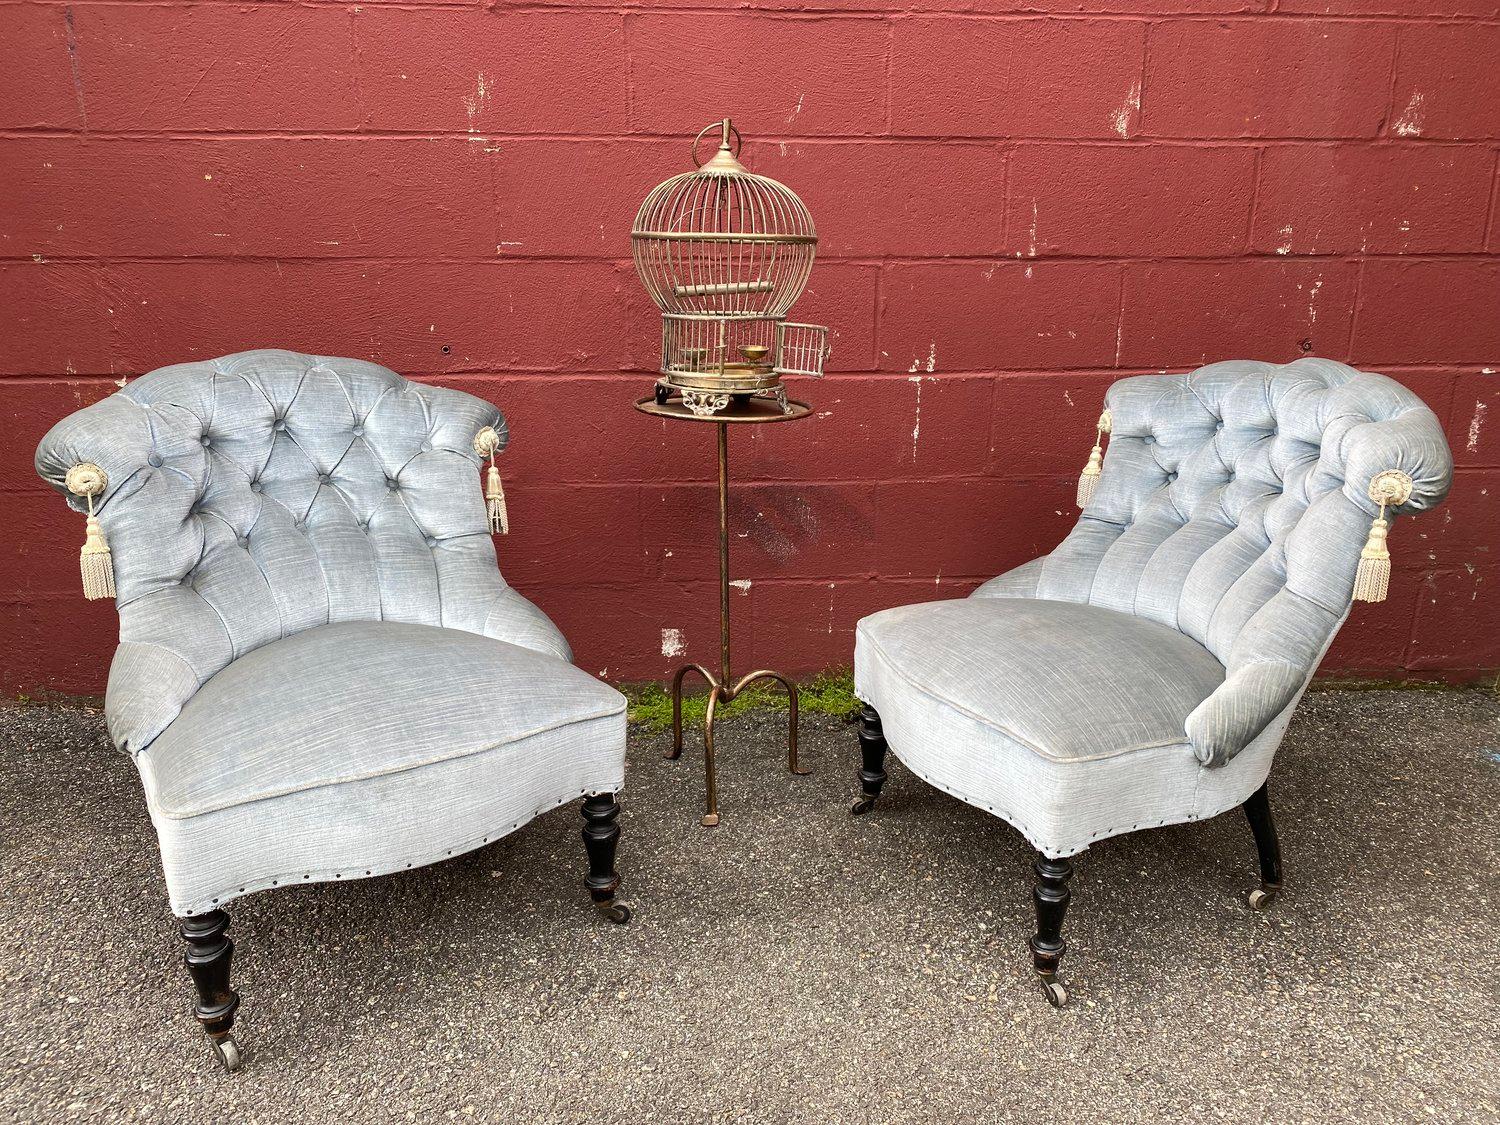 An elegant pair of small scale 19th century armchairs in pale blue. The chairs are classic French Napoleon III style, boasting tufted backs and tassels for added elegance. The pale blue upholstery provides a muted yet sophisticated touch that will